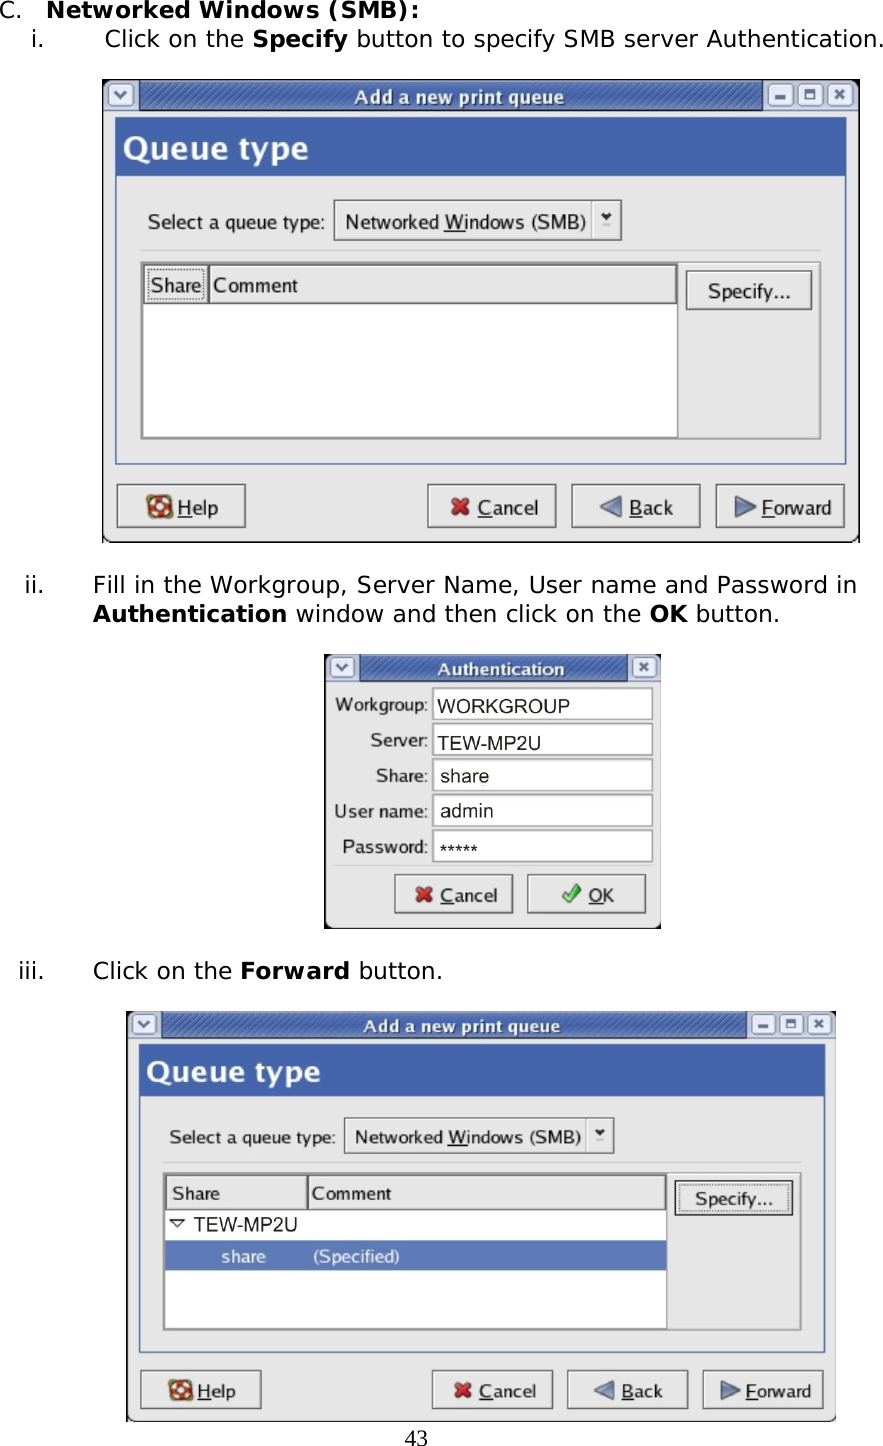     43C. Networked Windows (SMB): i.  Click on the Specify button to specify SMB server Authentication.  ii. Fill in the Workgroup, Server Name, User name and Password in Authentication window and then click on the OK button.  iii. Click on the Forward button.  